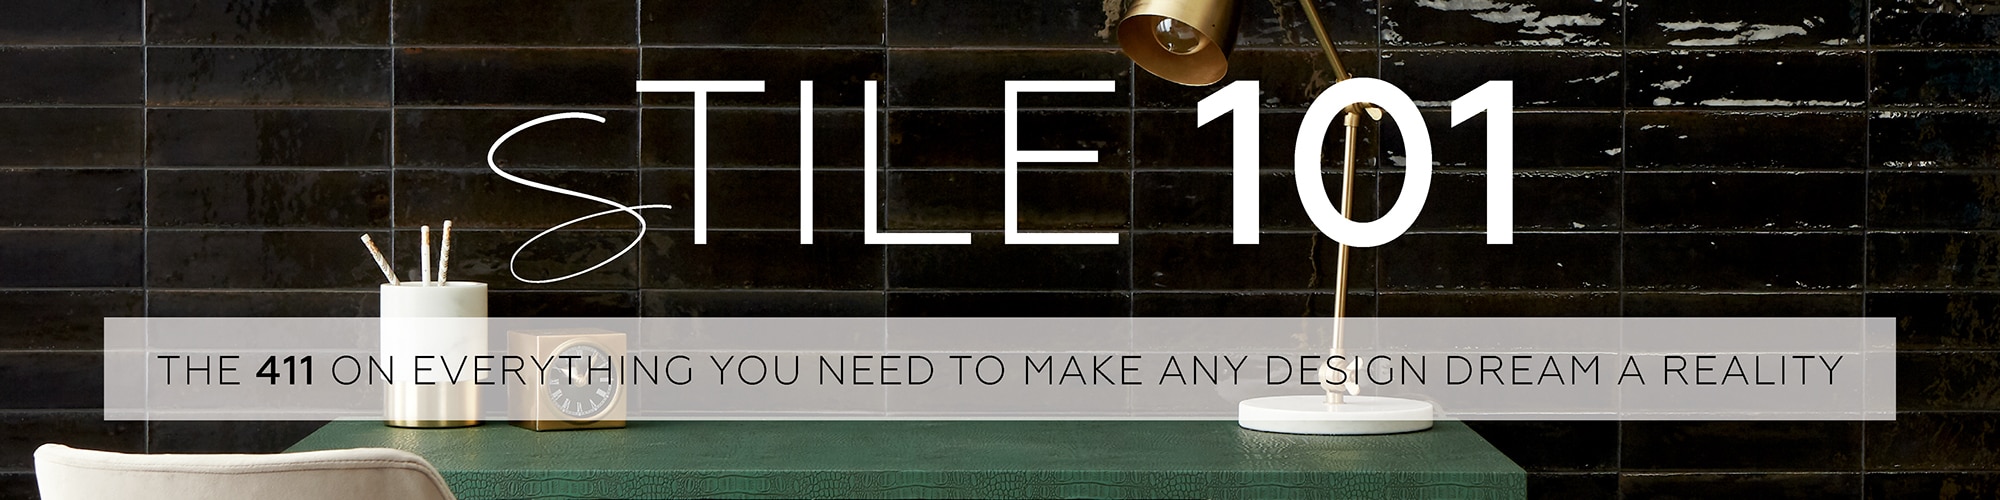 From inspiration to how-to instructions, Daltile has compiled basic information to make working from home a little easier for designers, architects, and DIYers